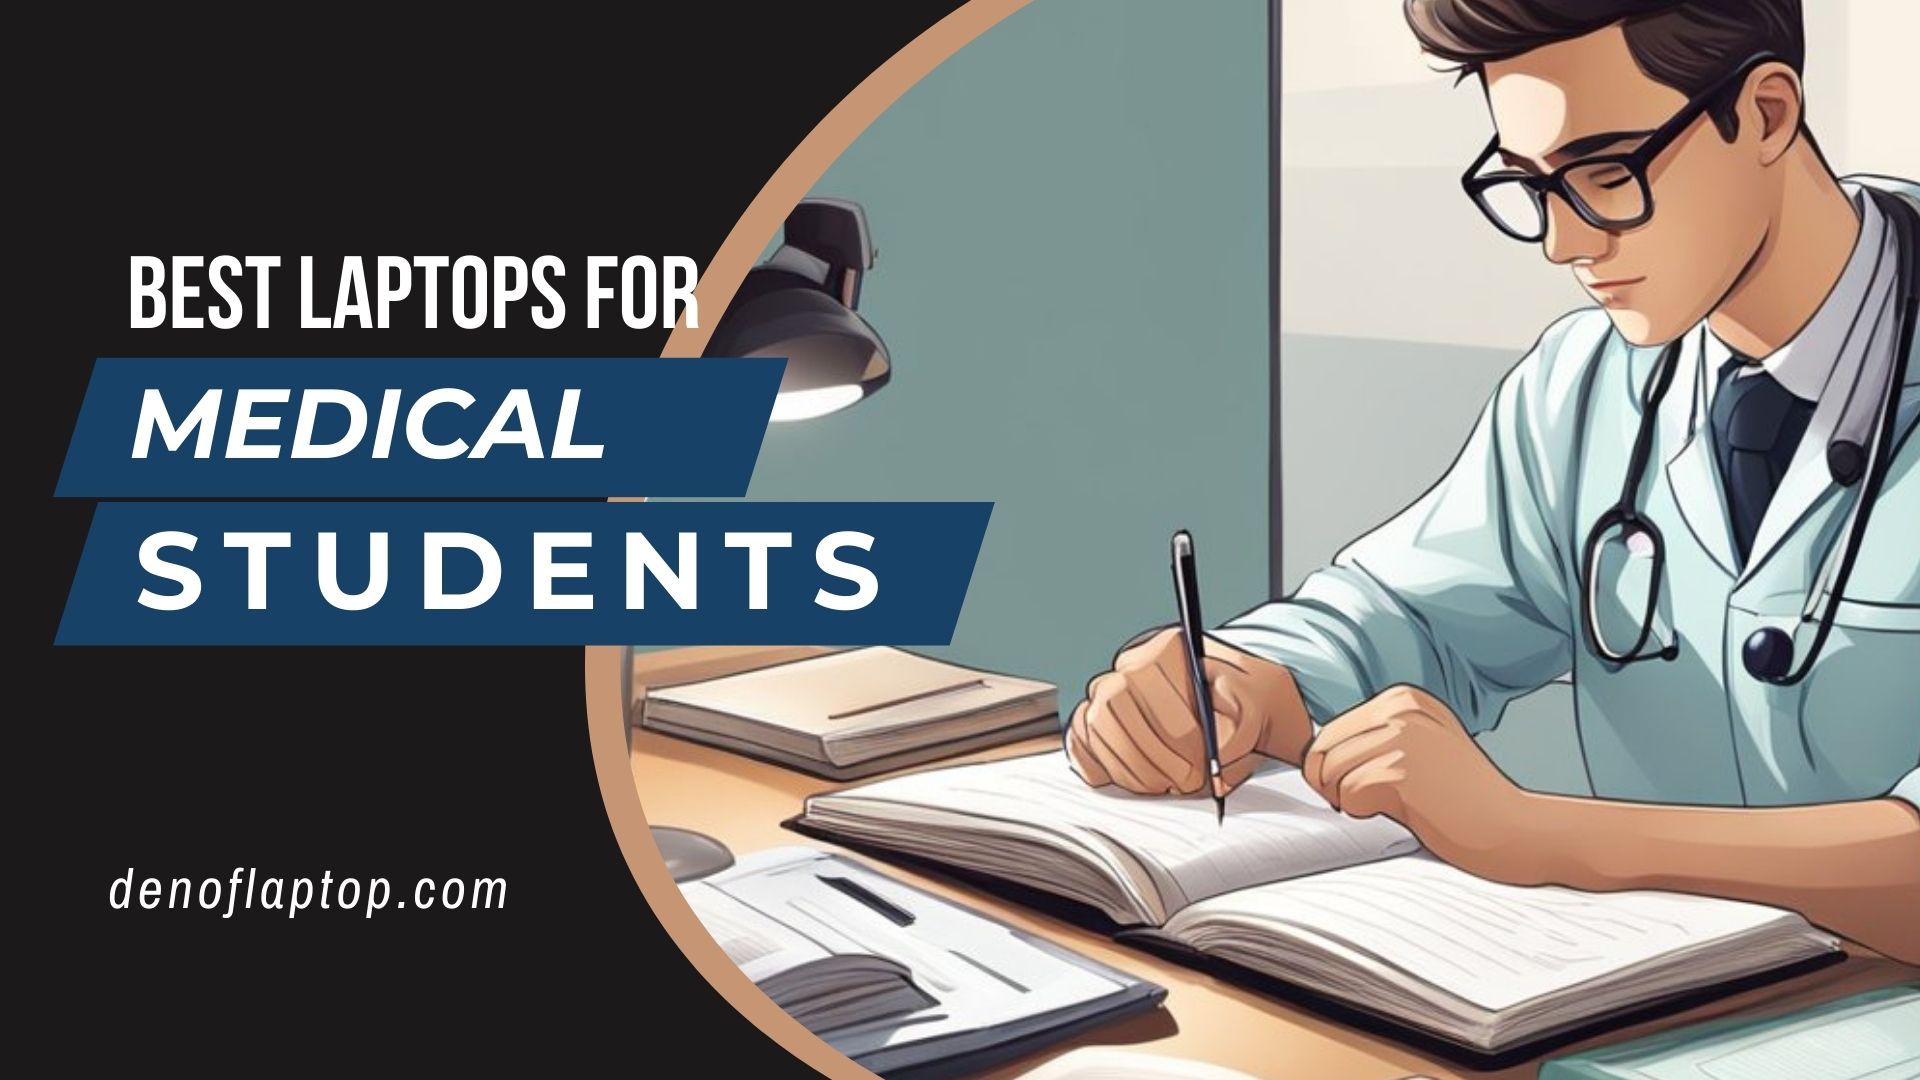 Best Laptops for Medical Students - Featured